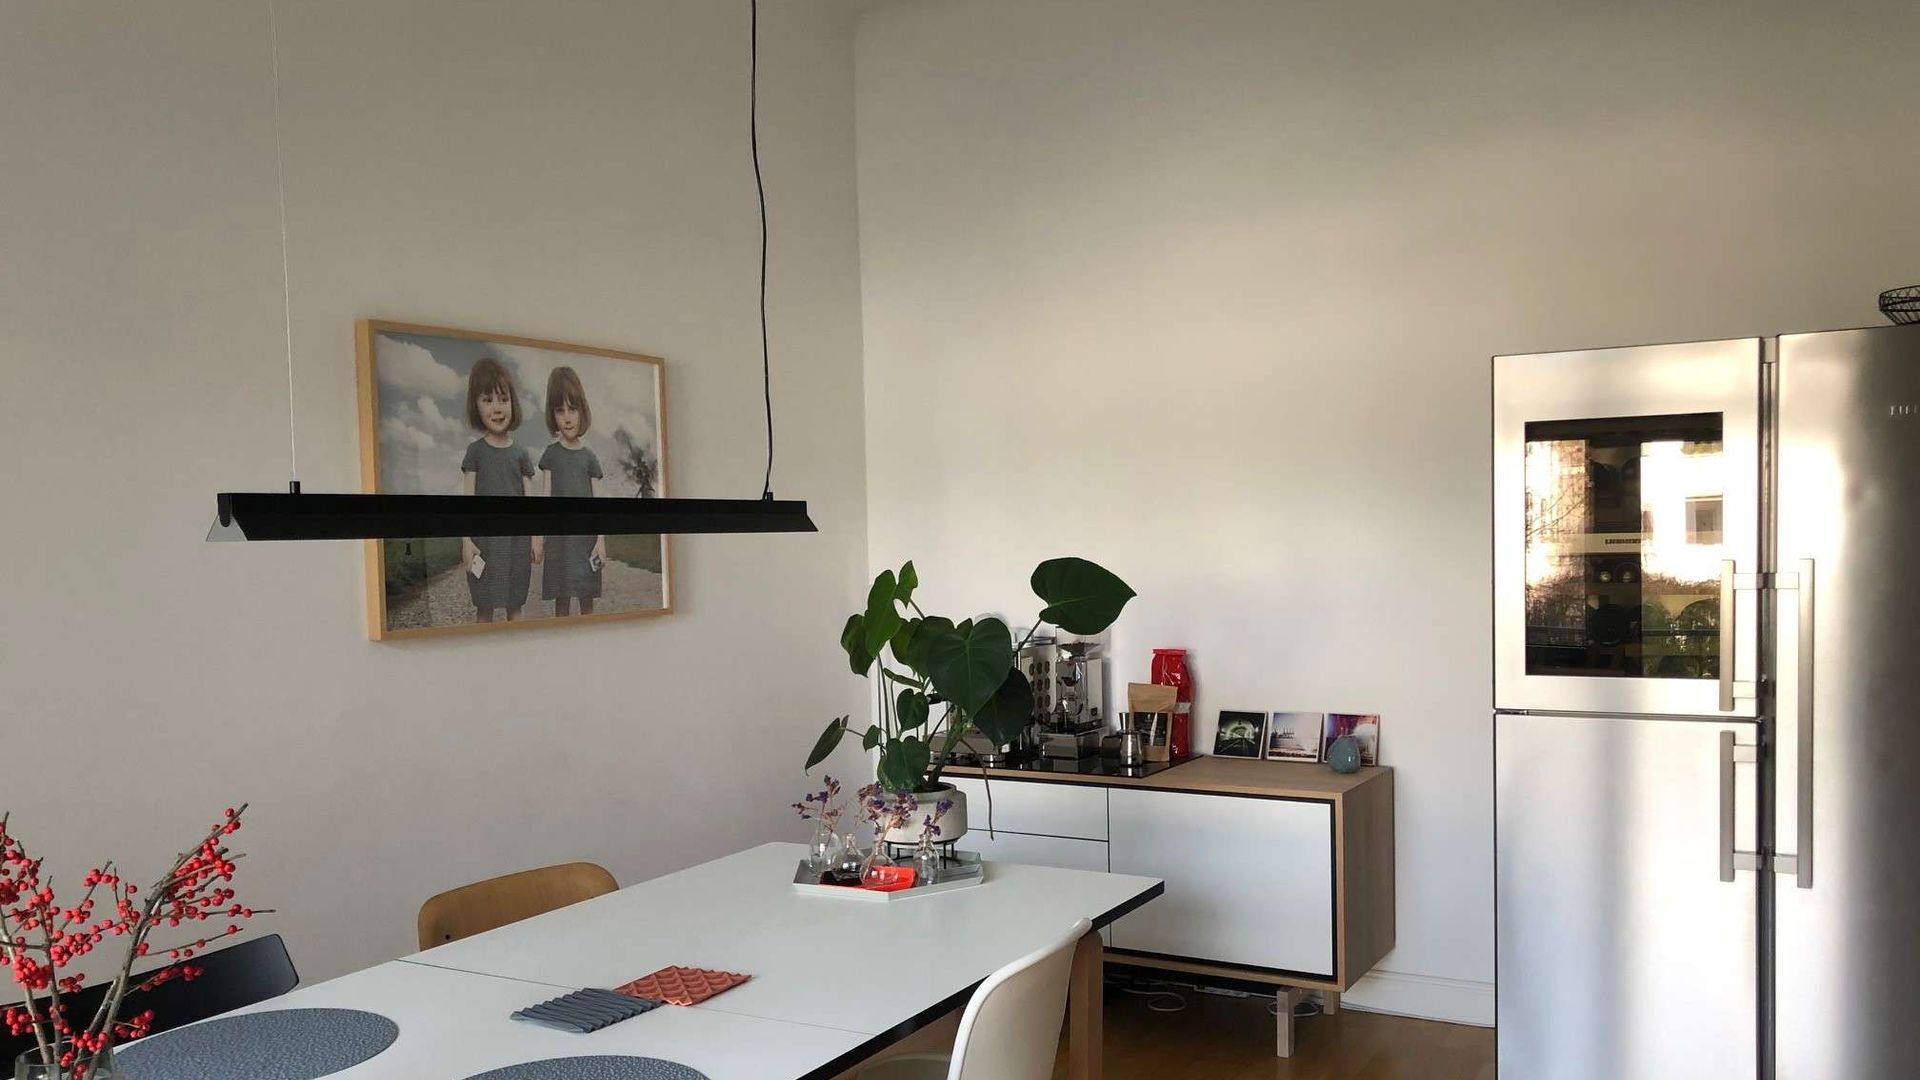 3 bedroom apartment at Steffenstra 223 e 30 40545 Dusseldorf Germany 